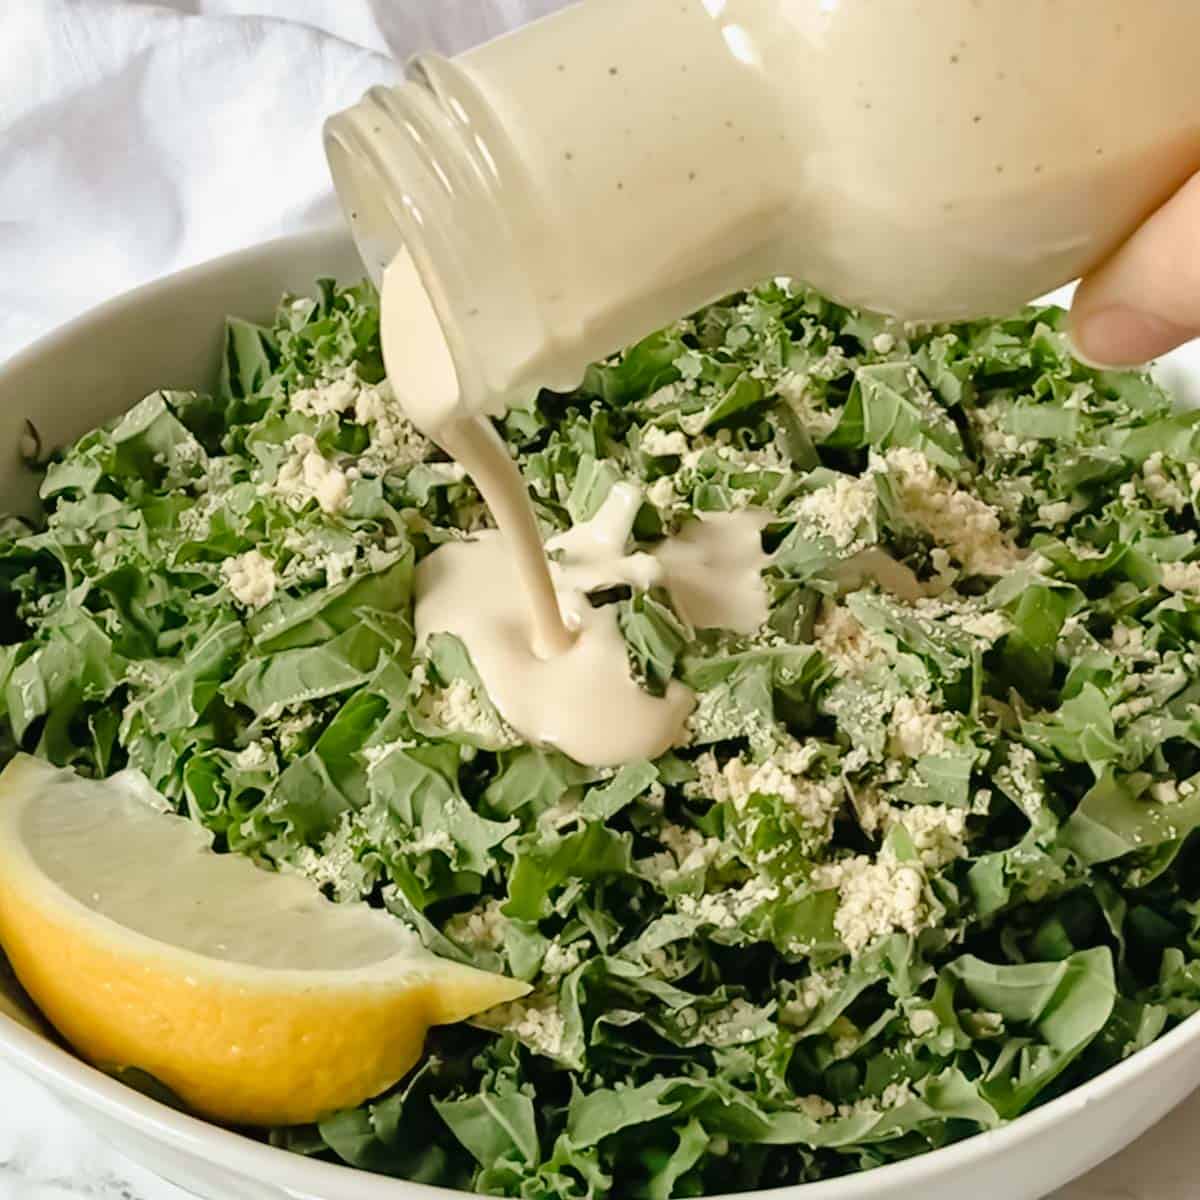 dressing being poured onto kale salad in white bowl.